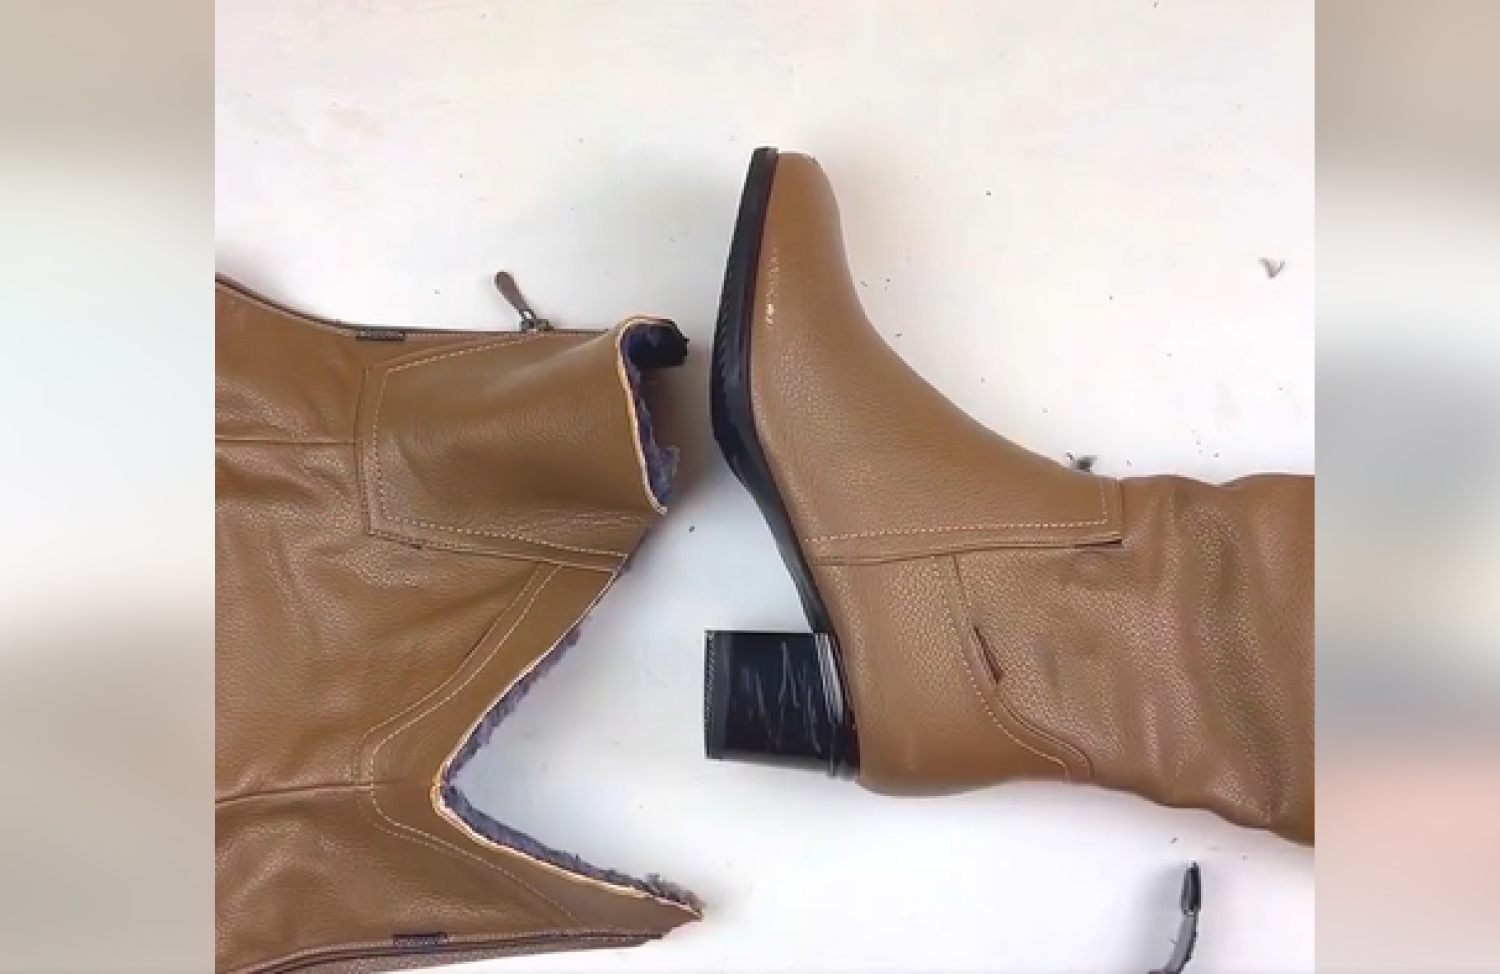 See what you can make from unused boots